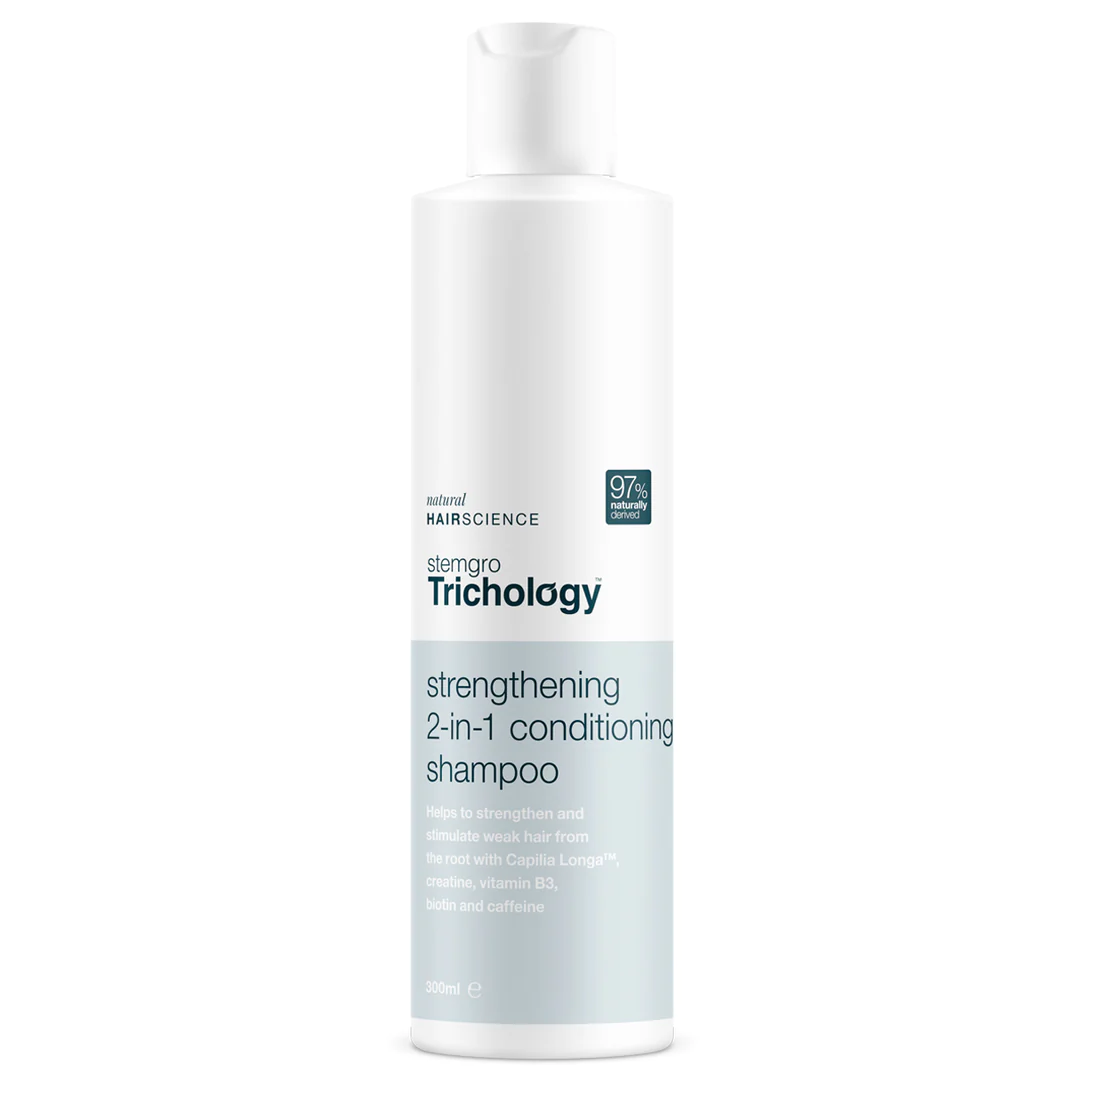 Stemgro Trichology Strengthening 2-in-1 Shampoo & Conditioner